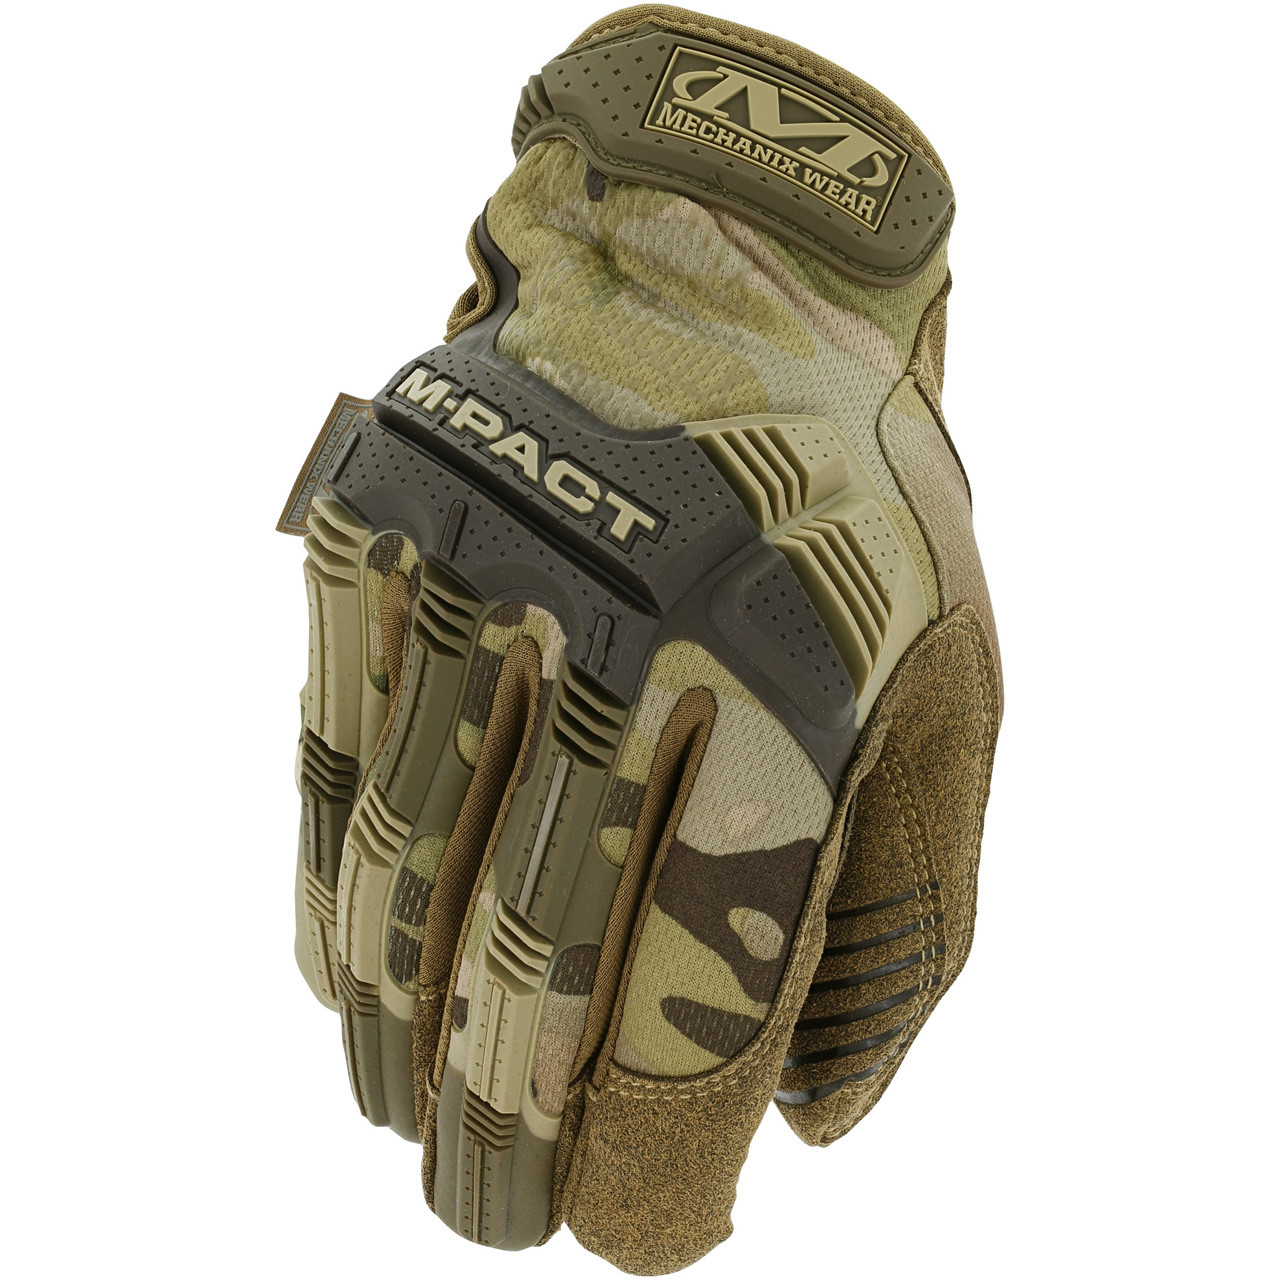 Mechanix Wear: M-Pact Covert Tactical Gloves with Secure Fit